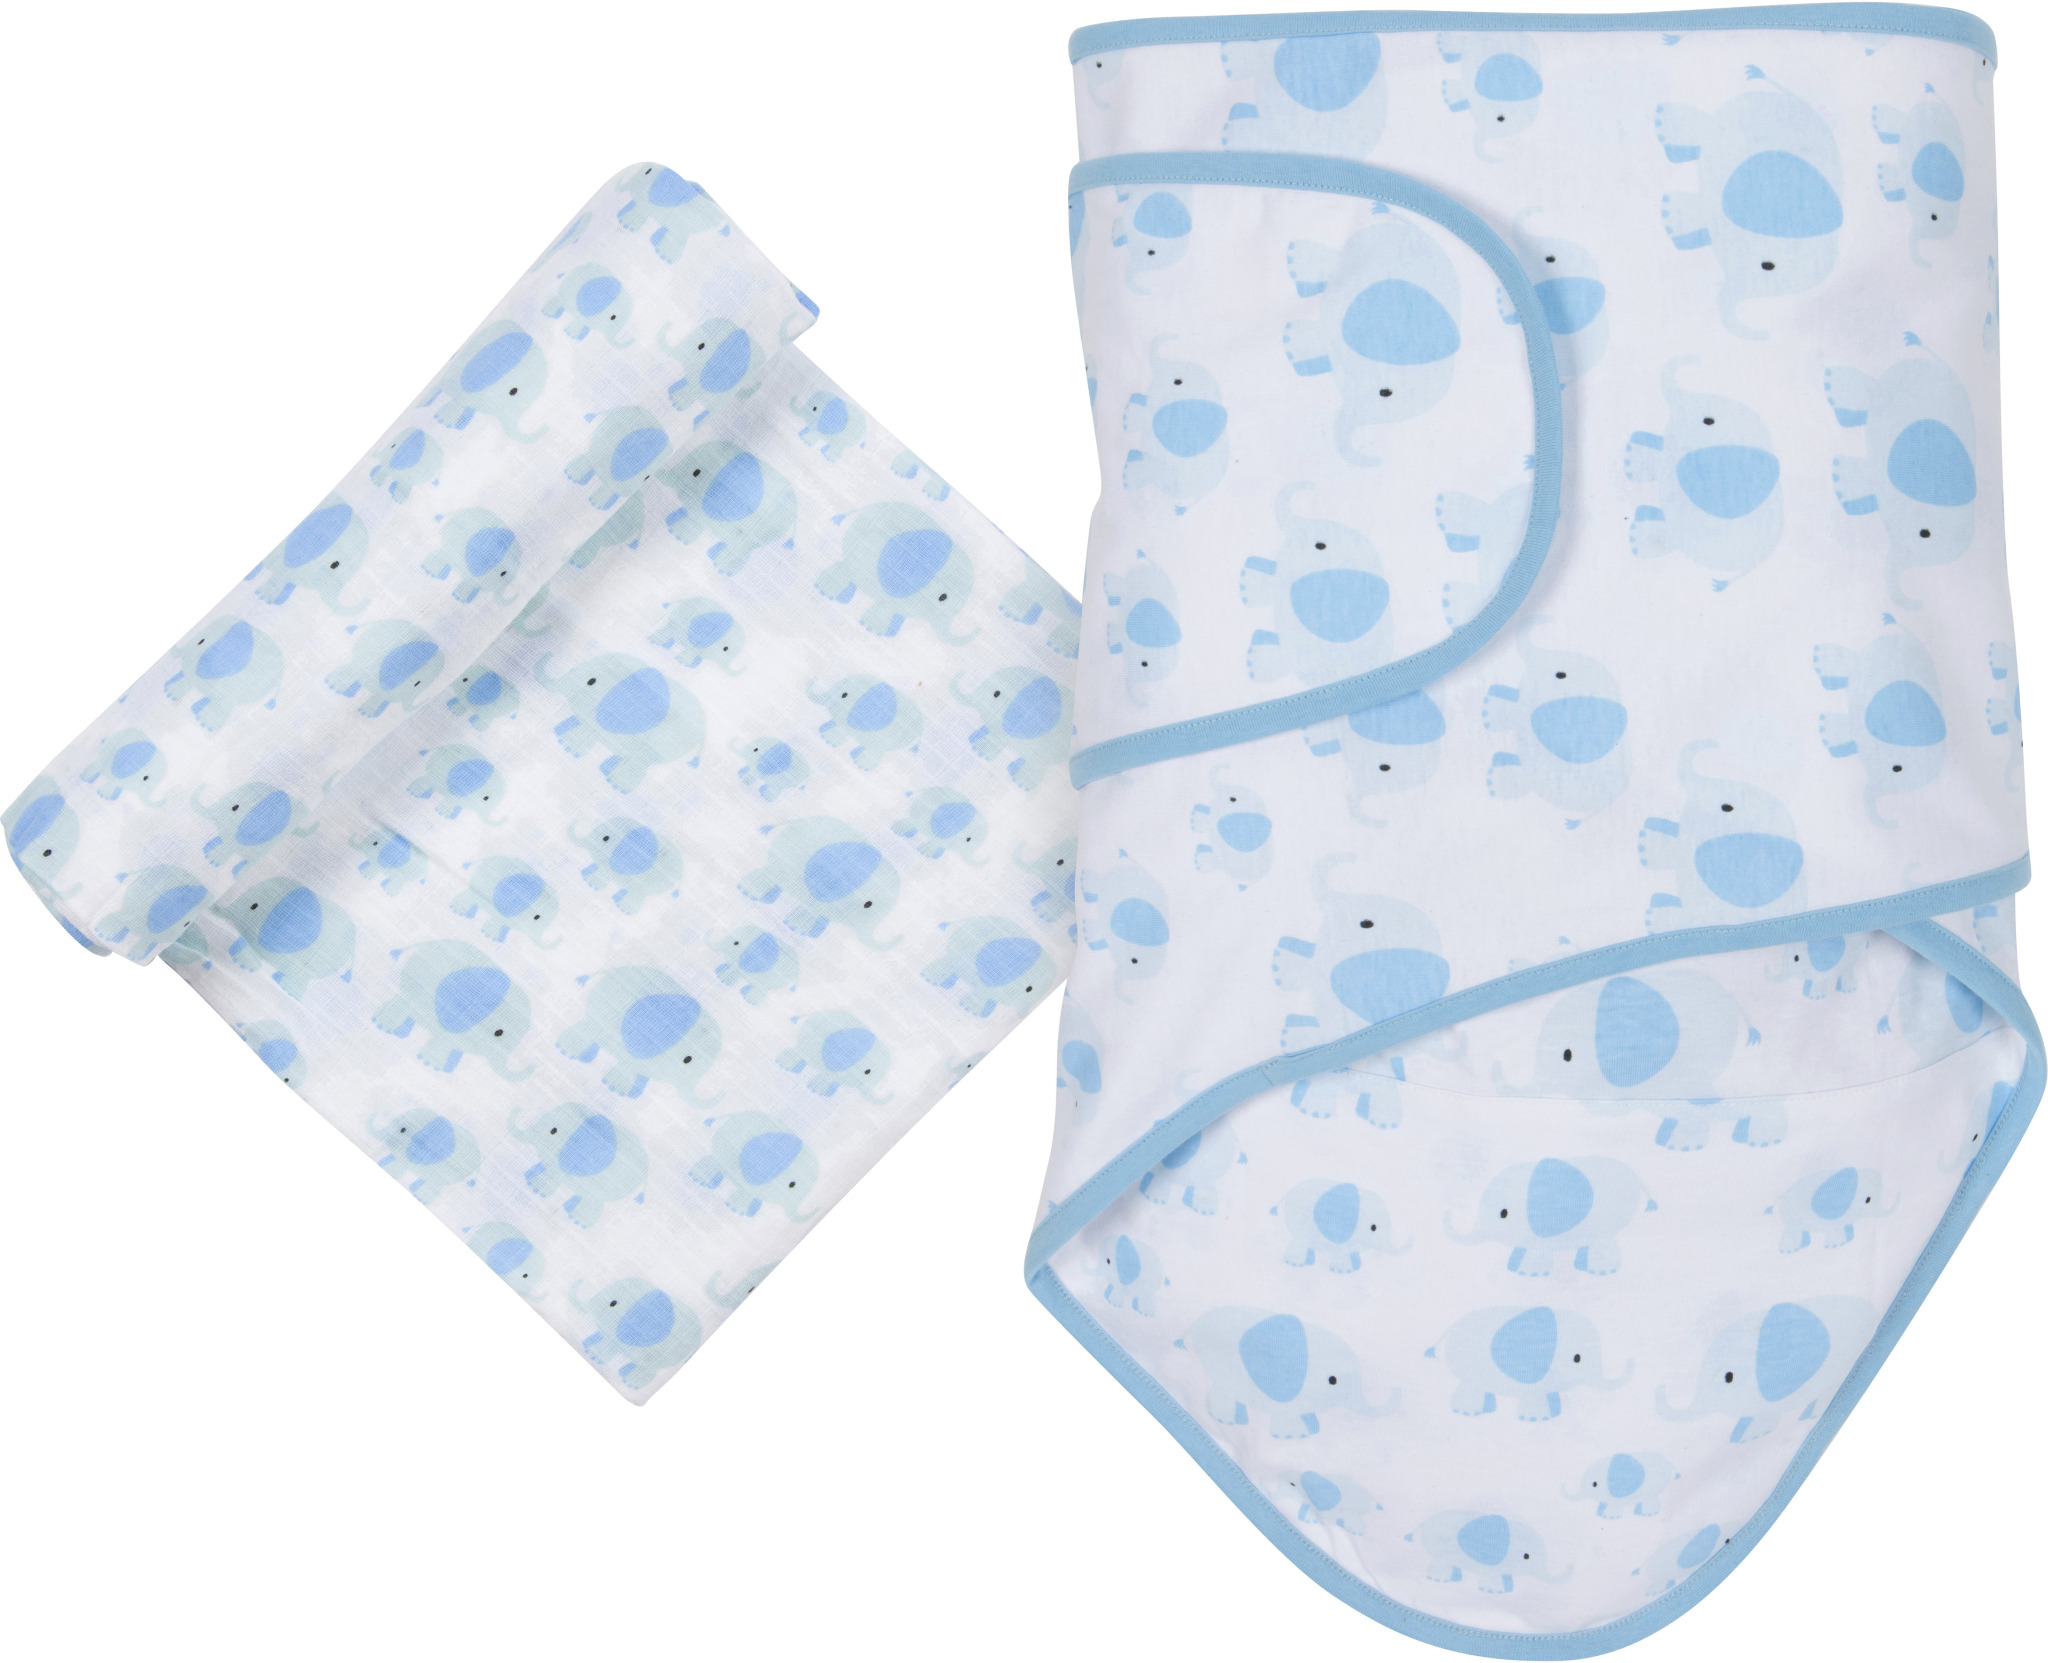 Blue Elephants Miracle Blanket and MiracleWare Muslin Swaddle Set